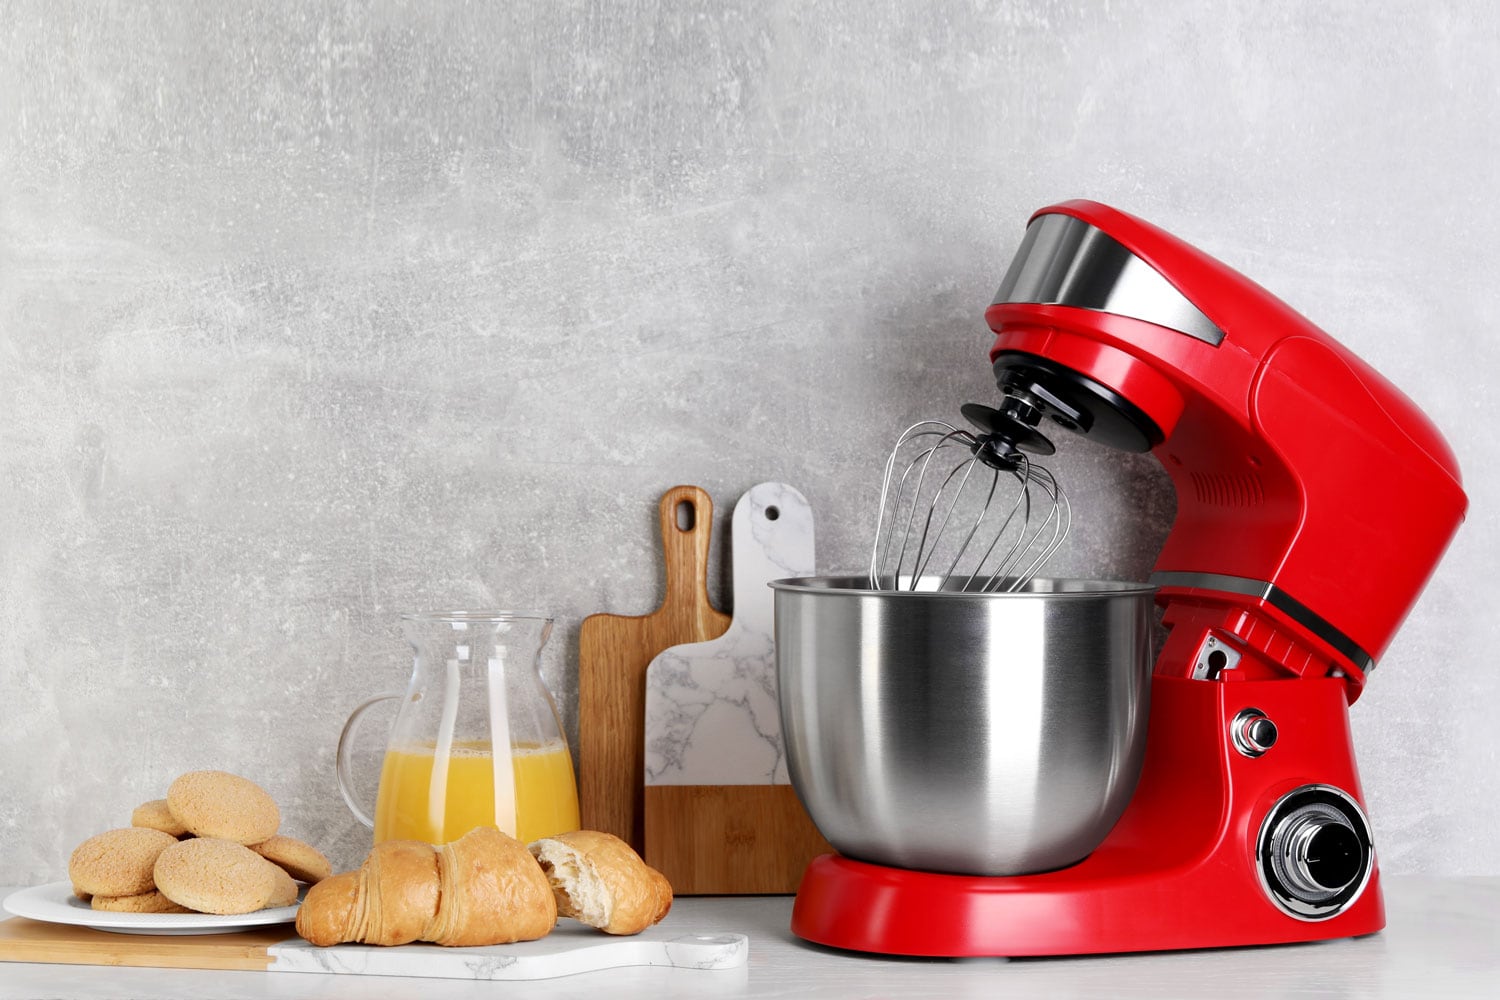 A Vivohome stand mixer in the kitchen